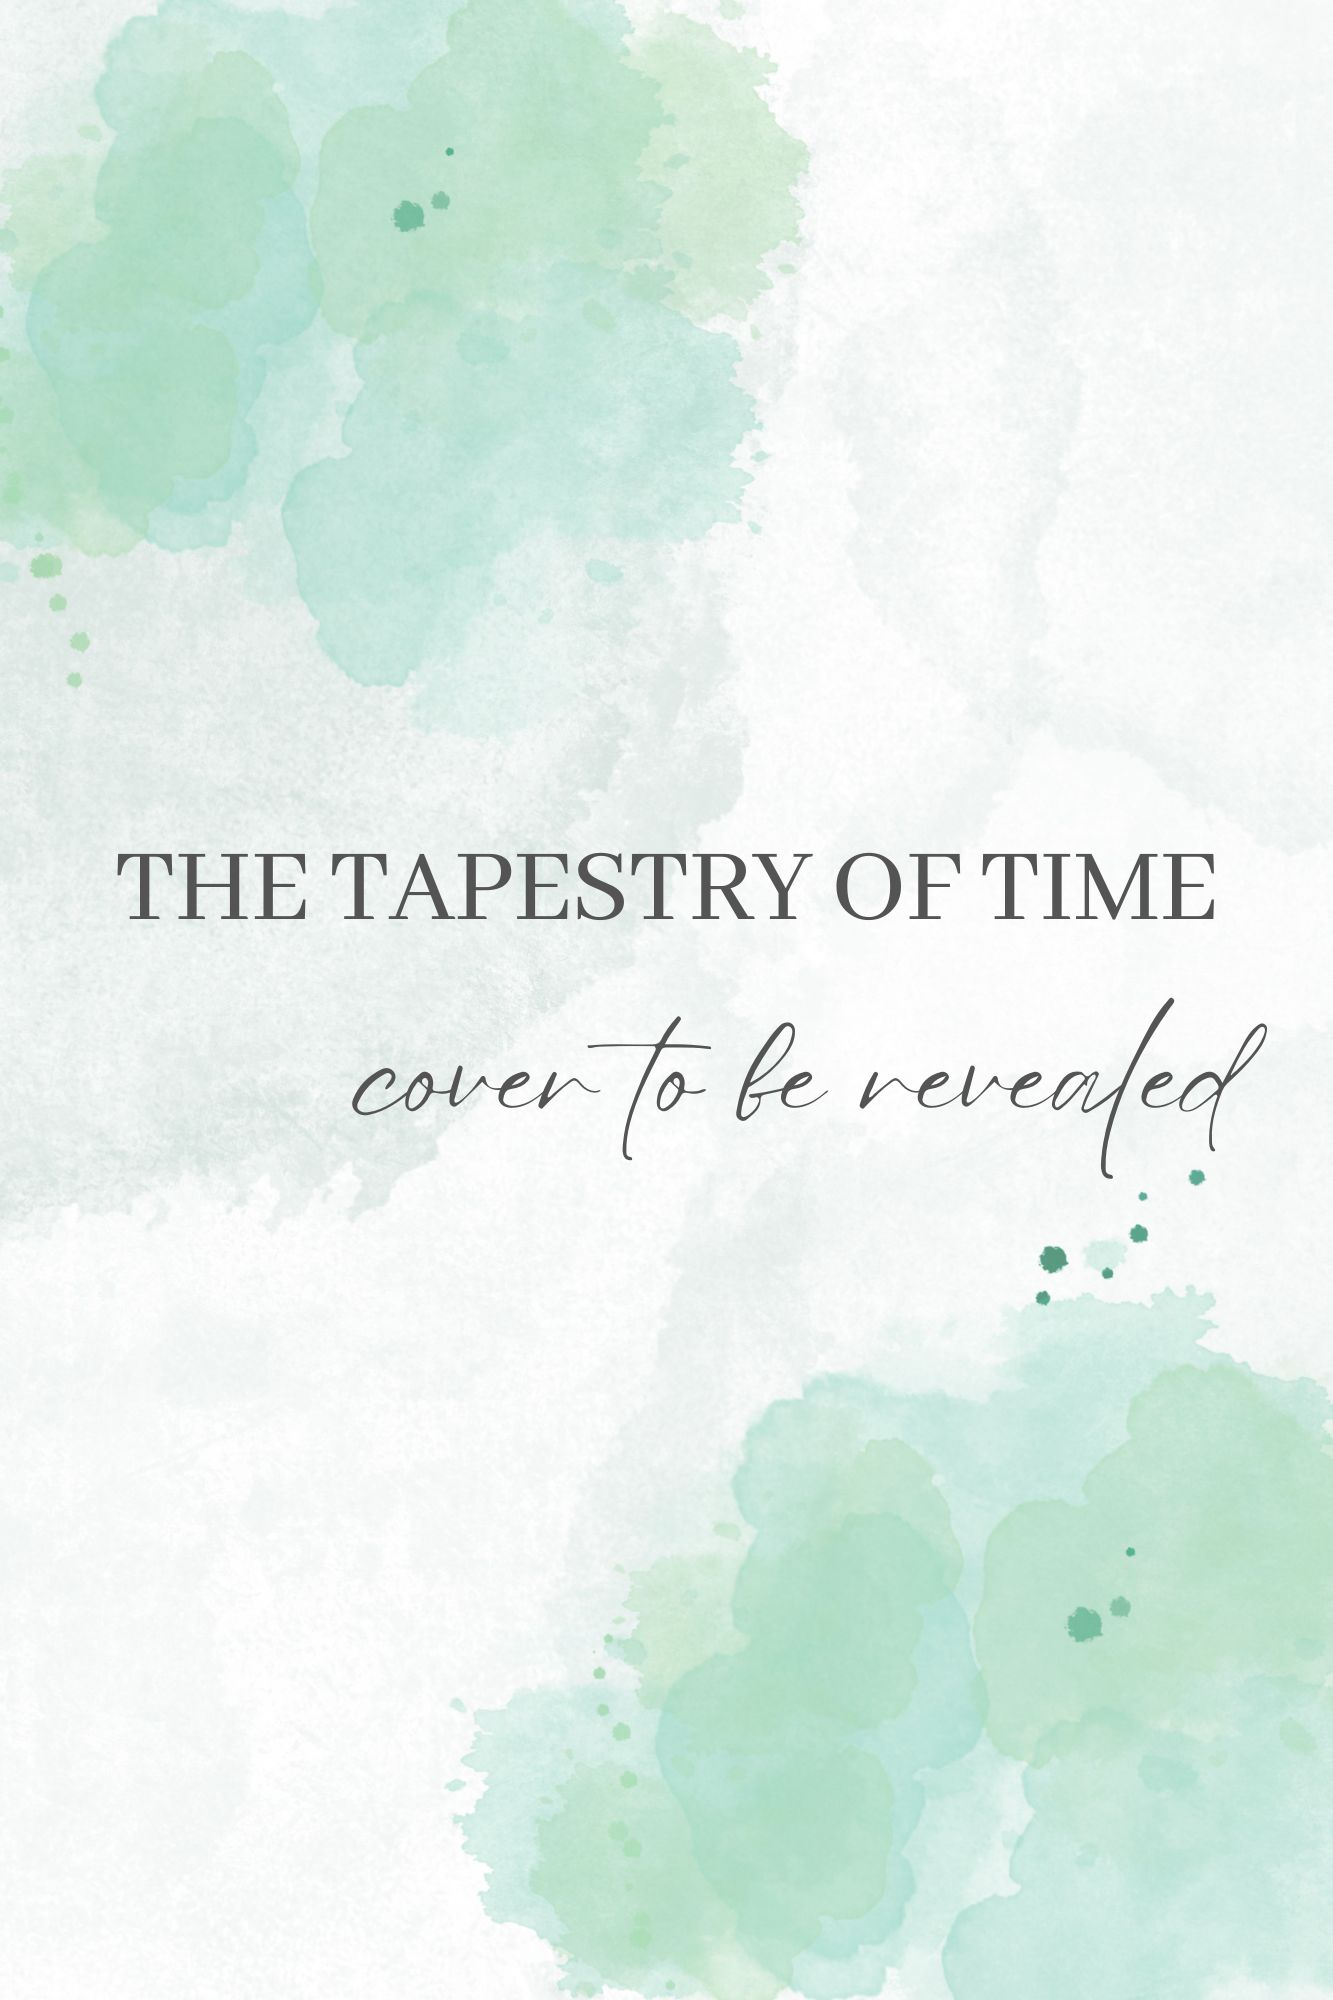 A green and white placeholder cover saying "The Tapestry of Time: Cover to be revealed."